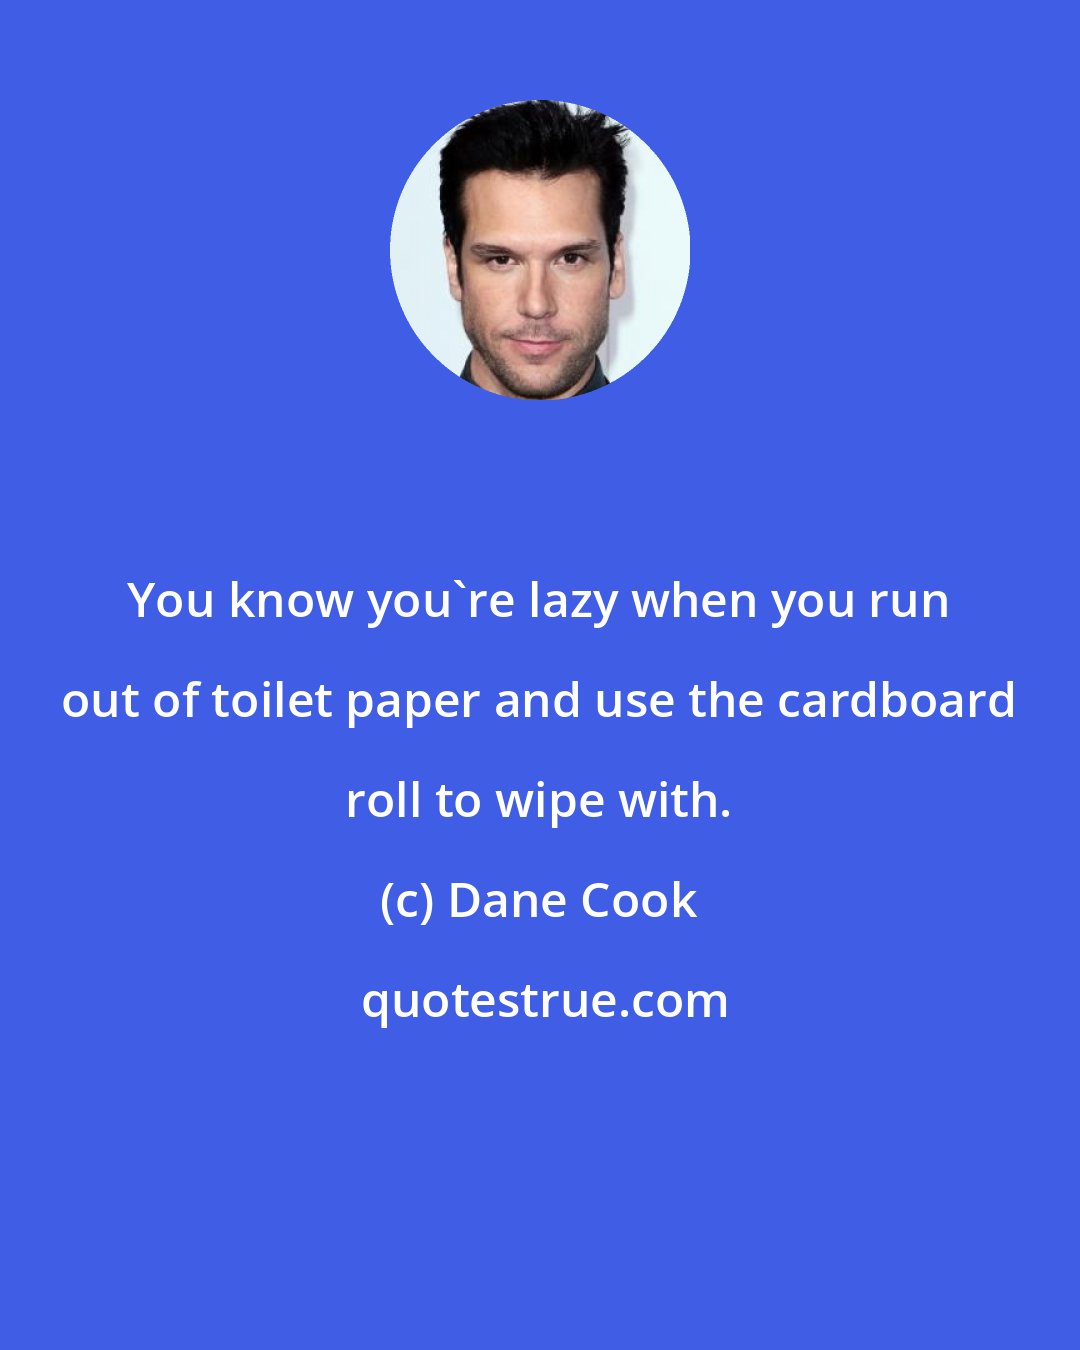 Dane Cook: You know you're lazy when you run out of toilet paper and use the cardboard roll to wipe with.